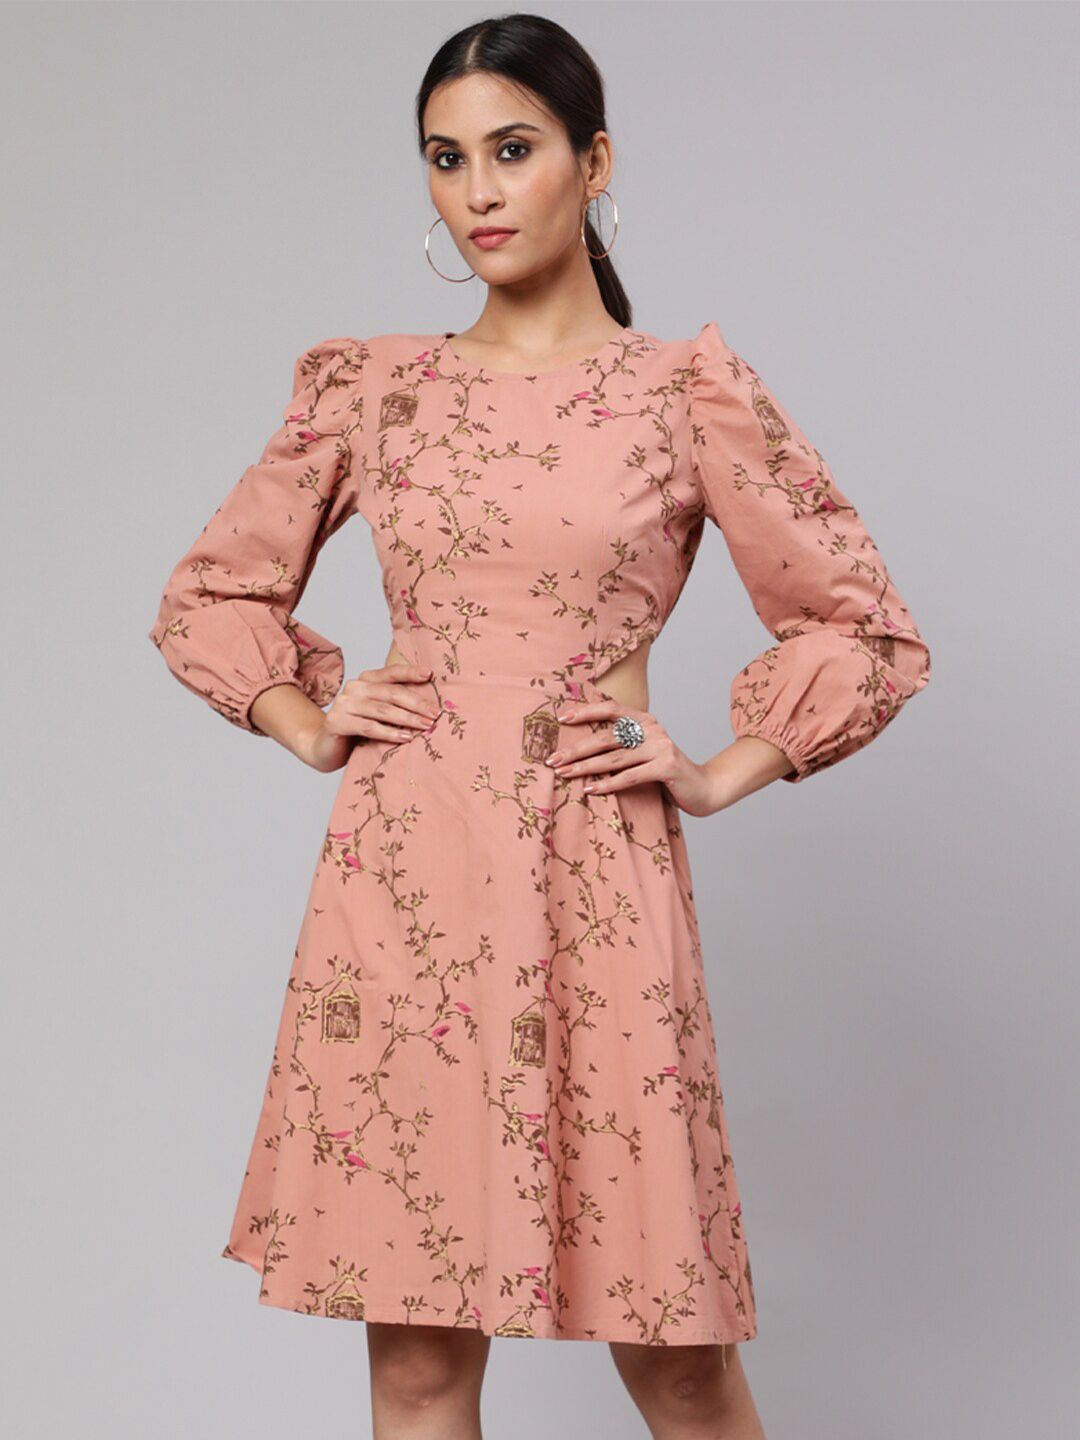 AKS Brown Floral Print Puff Sleeve Fit & Flare Dress Price in India